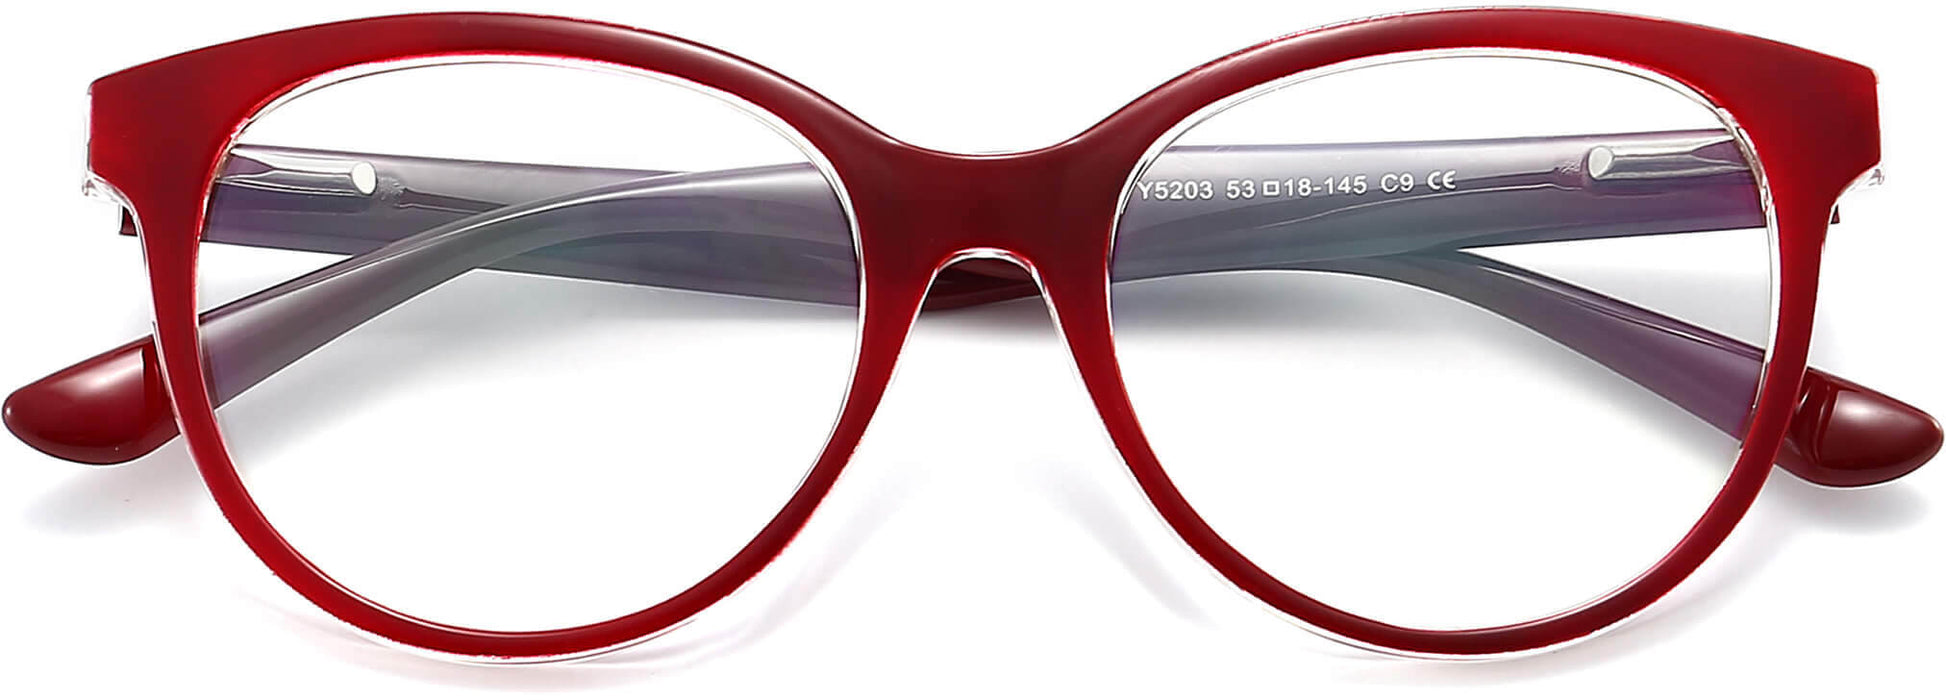 Remy Cateye Red Eyeglasses from ANRRI, closed view